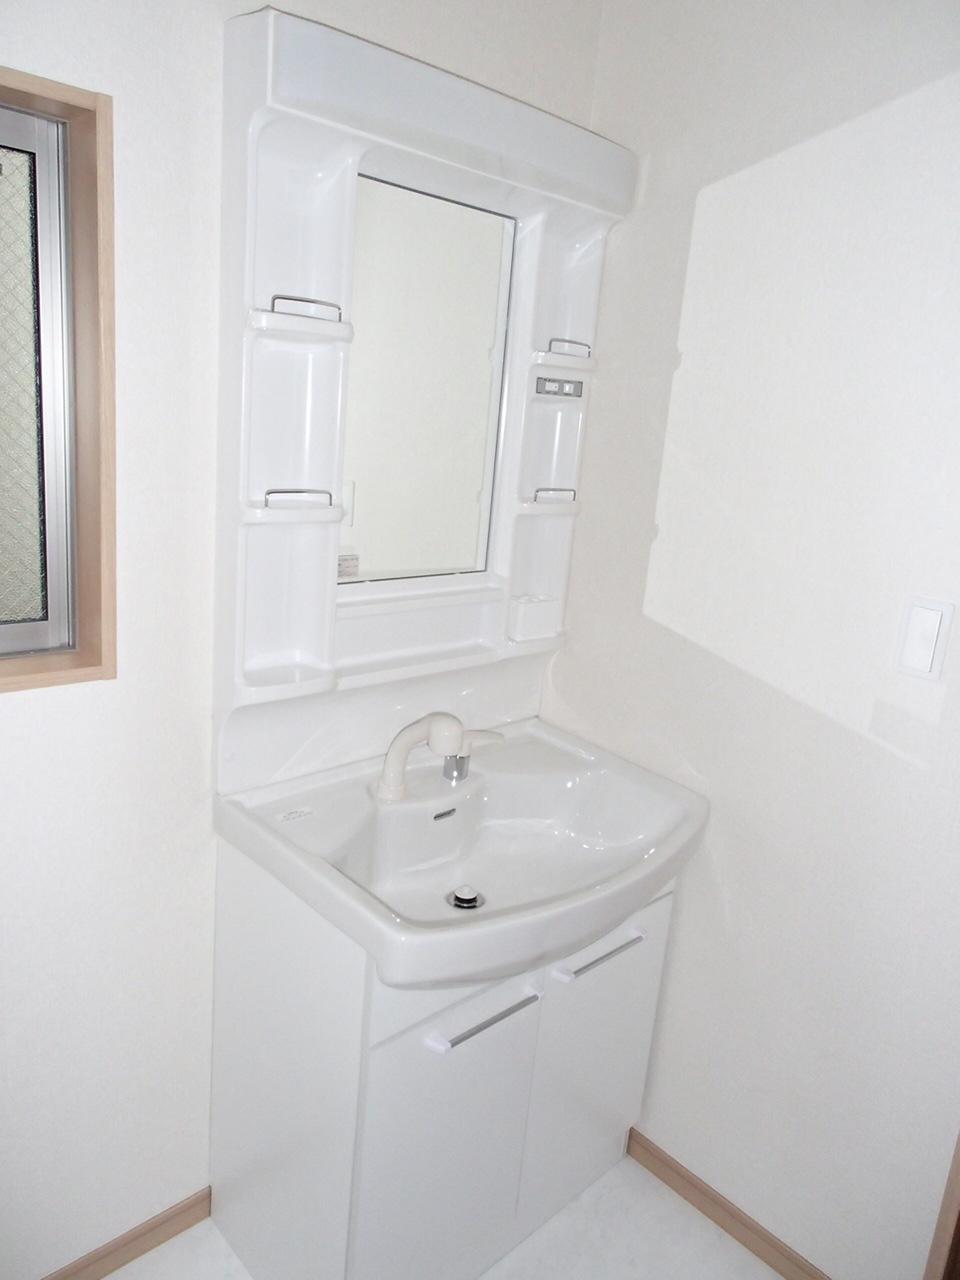 Wash basin, toilet. It is a wash basin with a convenient shower function. (3 Building)